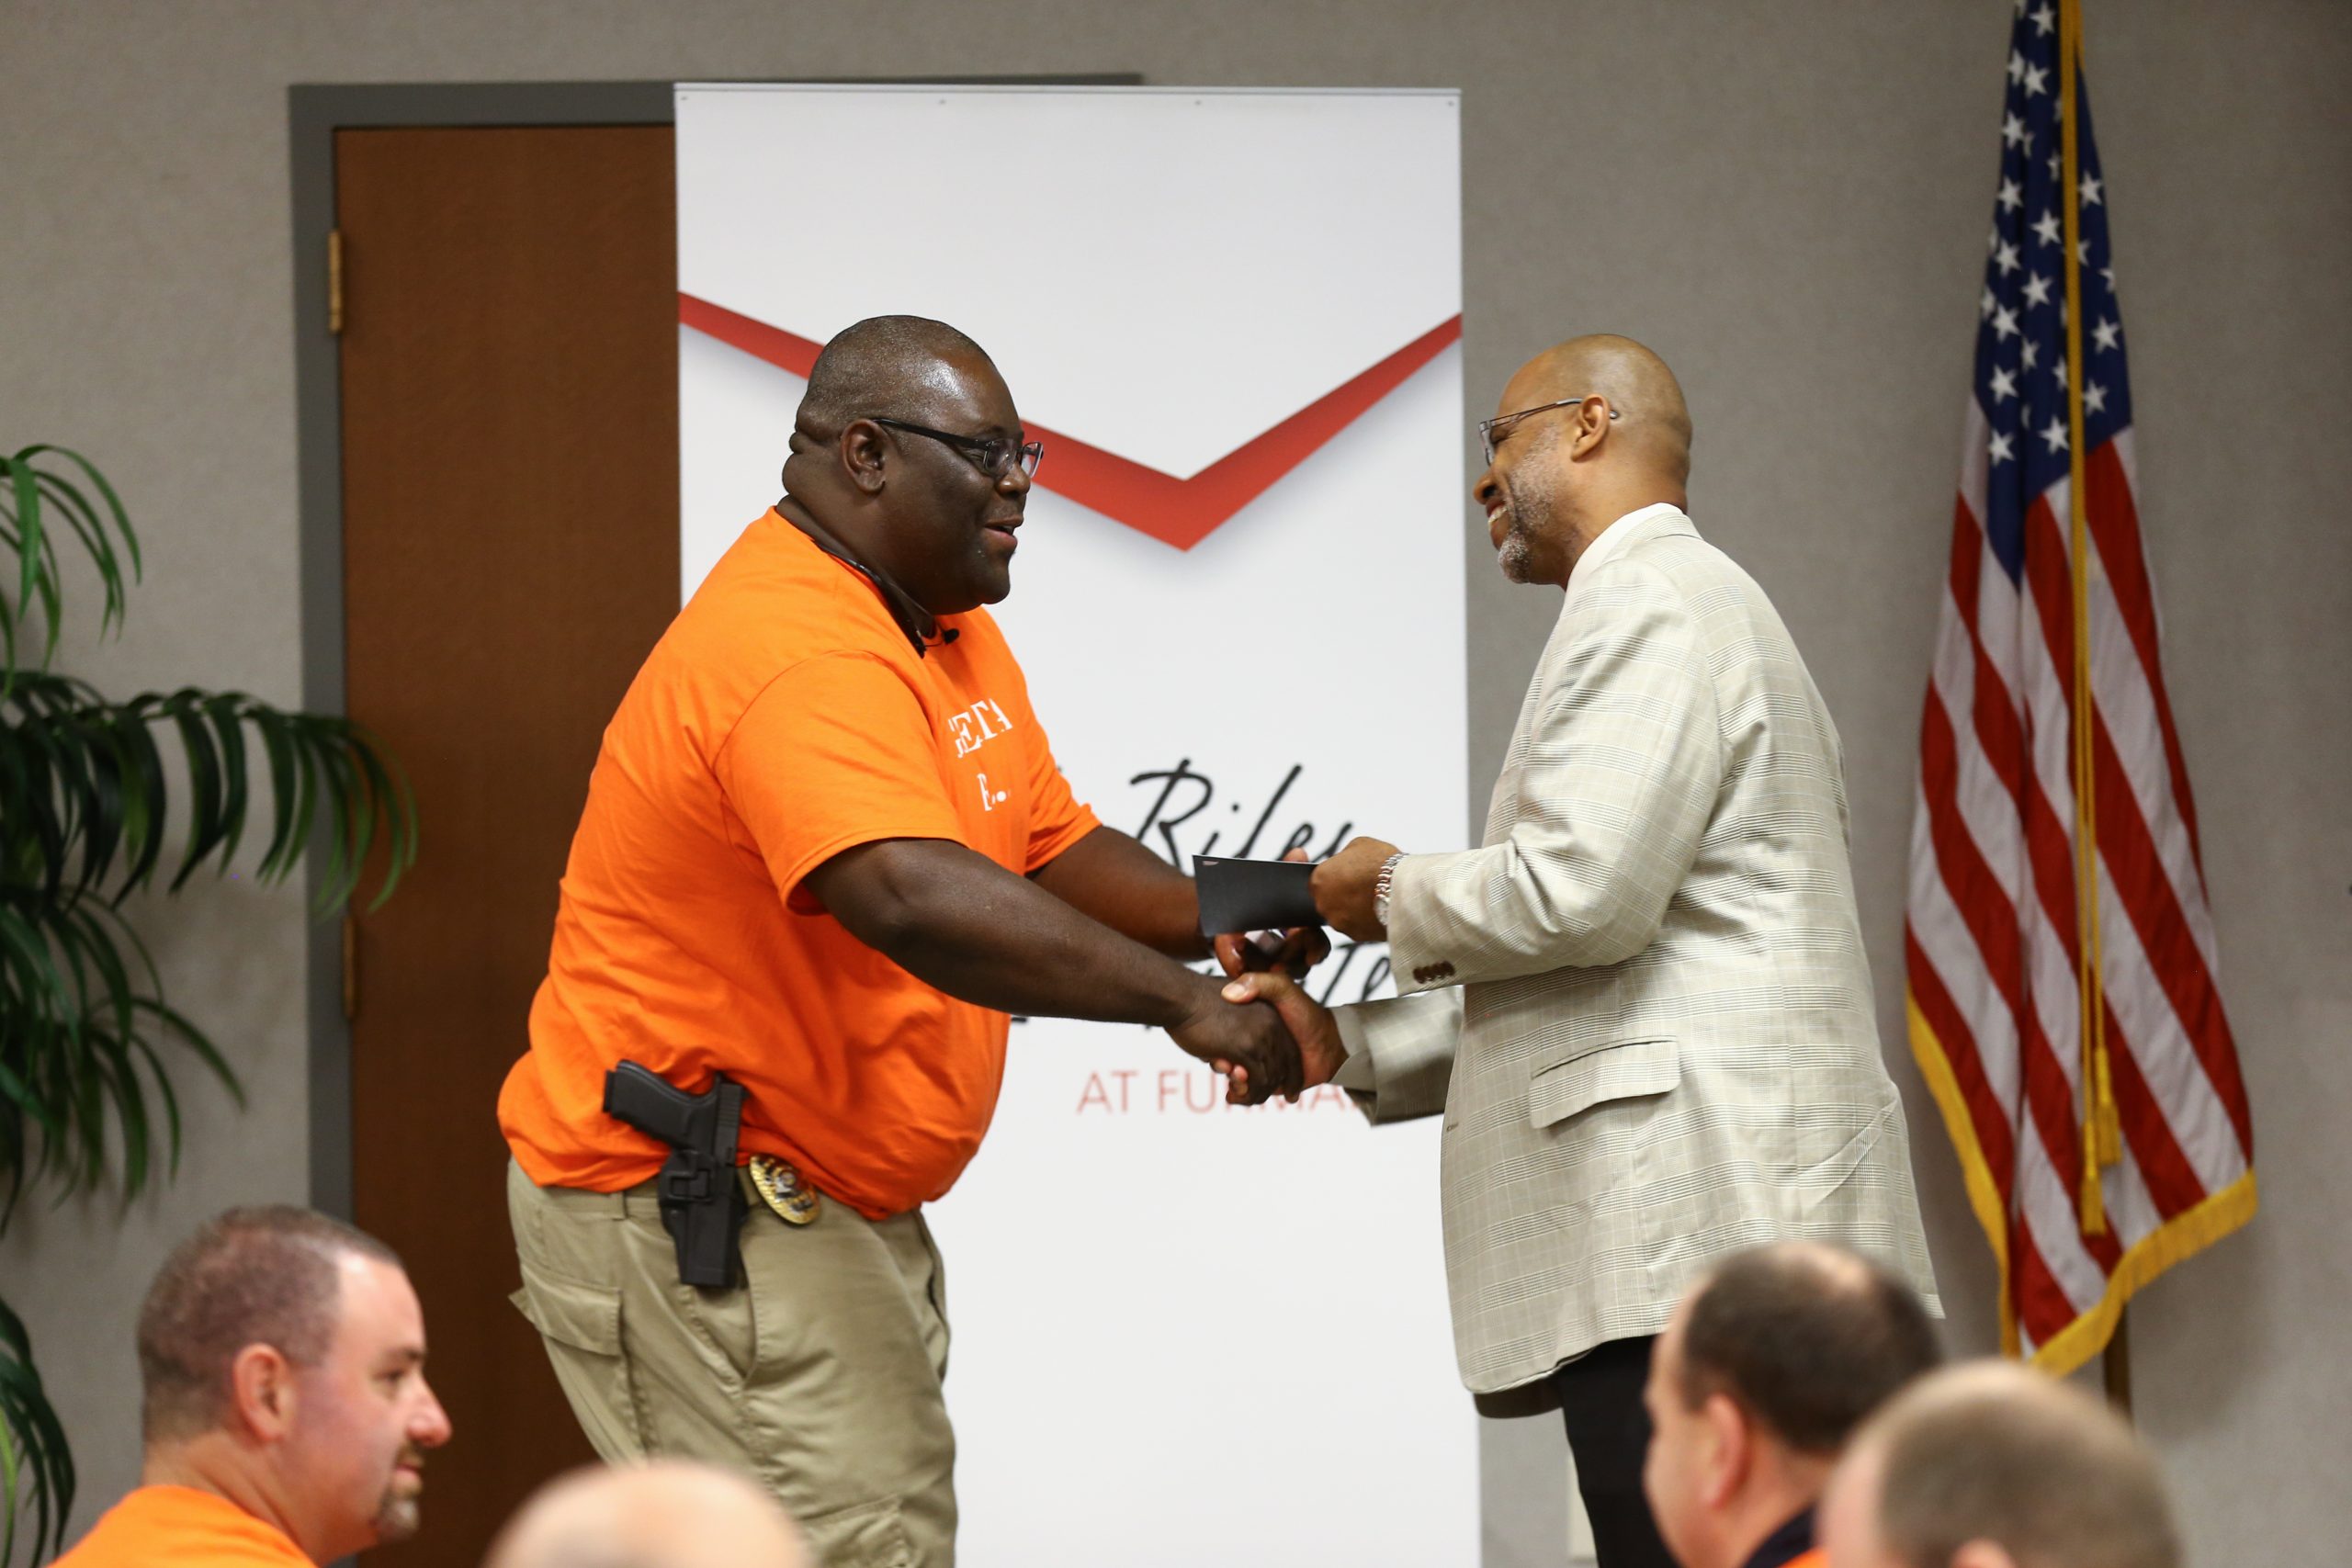 Juan Johnson presenting the Riley Fellow certificate to Timmie Williams, Greenville